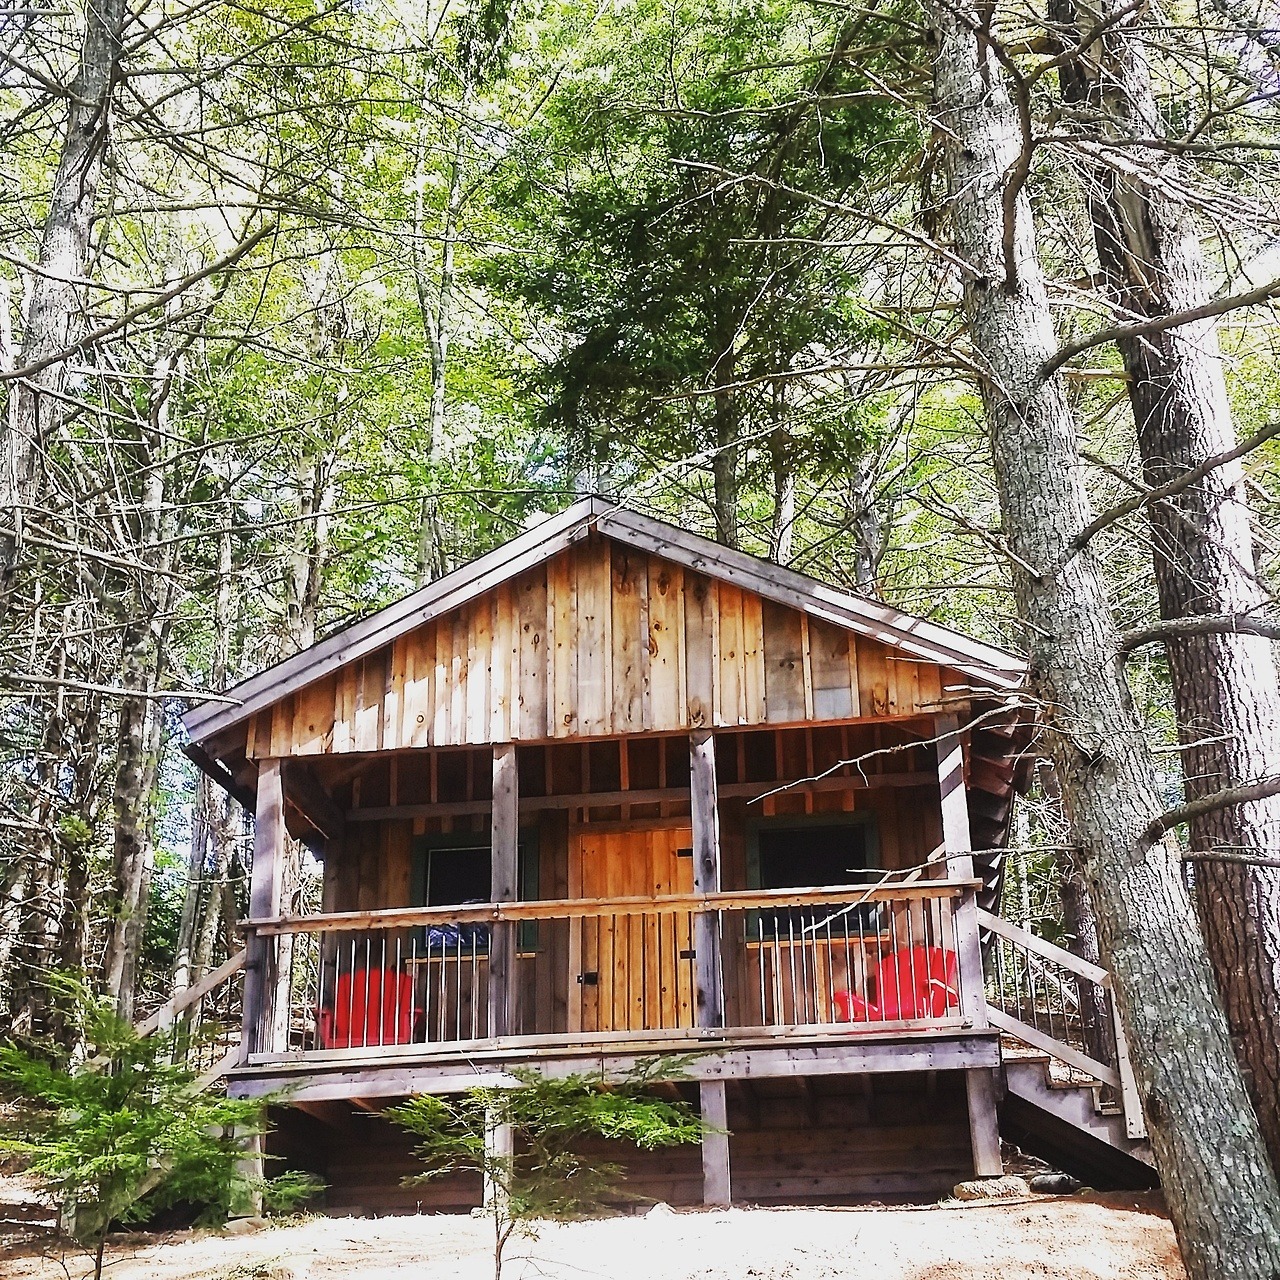 Cabin nestled in Kejimkujik National Park, in Nova Scotia, Canada
Constructed by local students in a carpentry program and based on early 19th century trapper shack designs. Available to rent in a peaceful, private setting with an amazing riverfront...